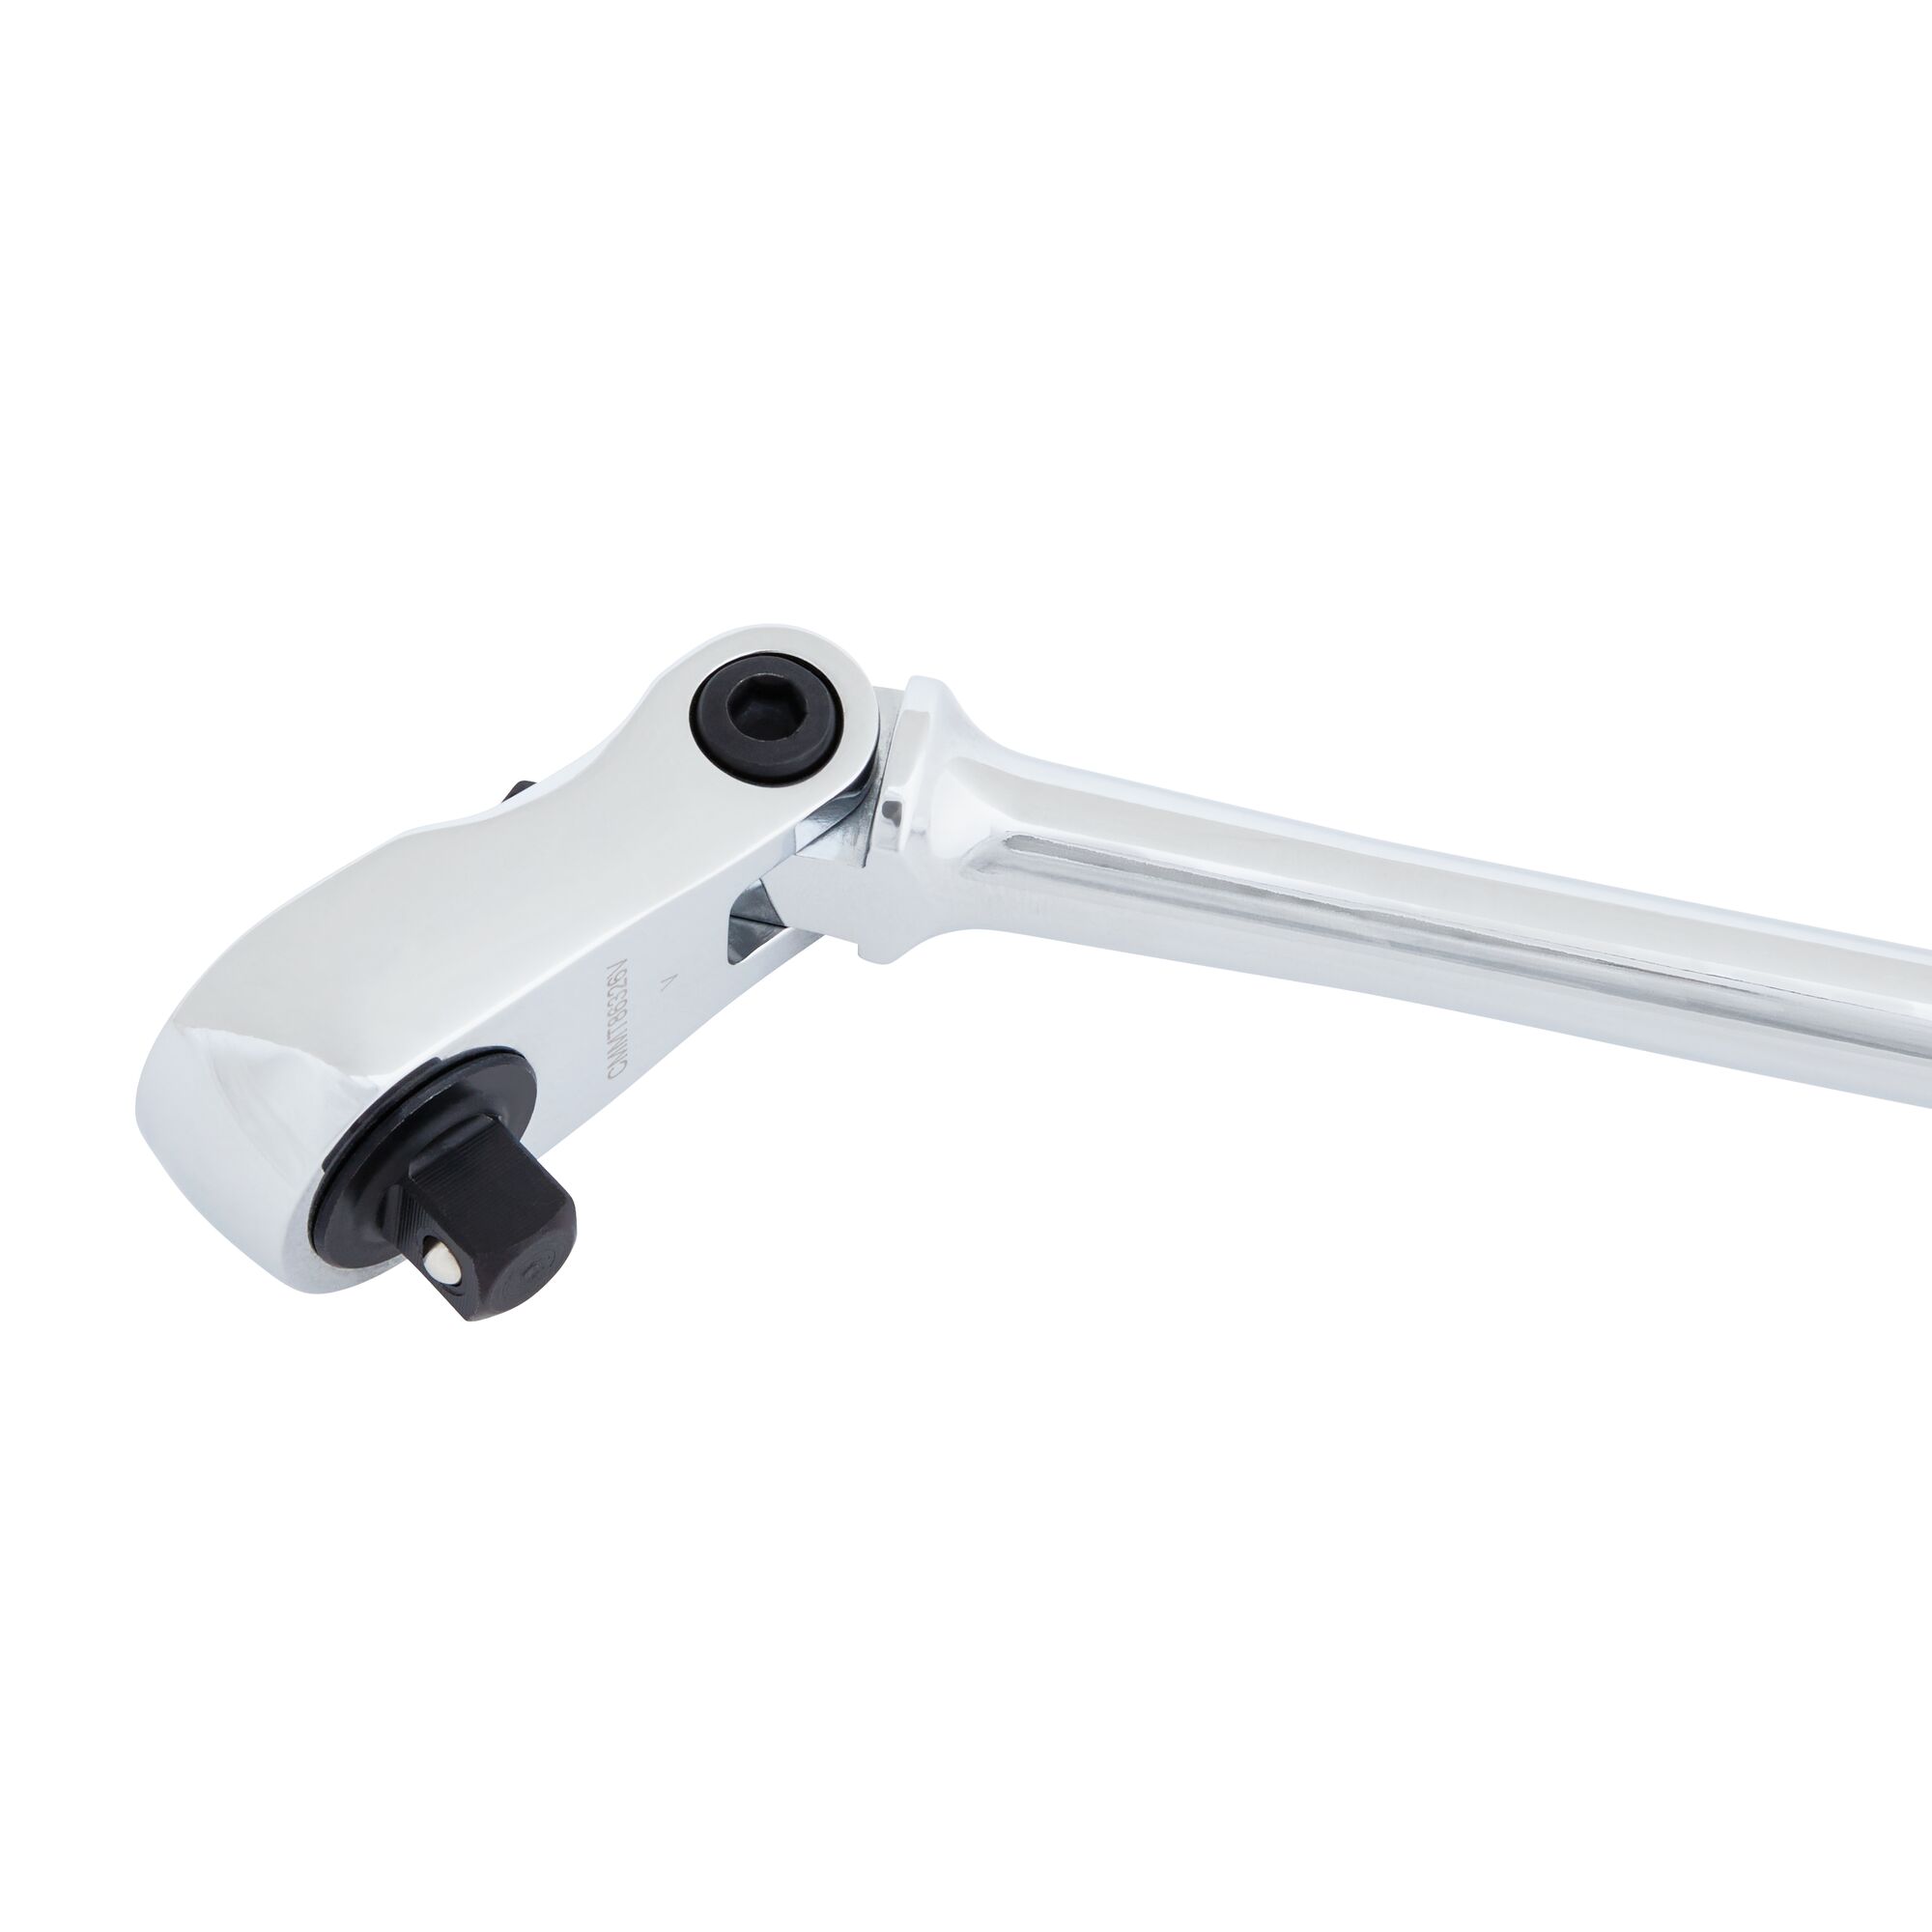 180 degrees articulating head feature in V series three eighth inch drive comfort grip long flex head ratchet.